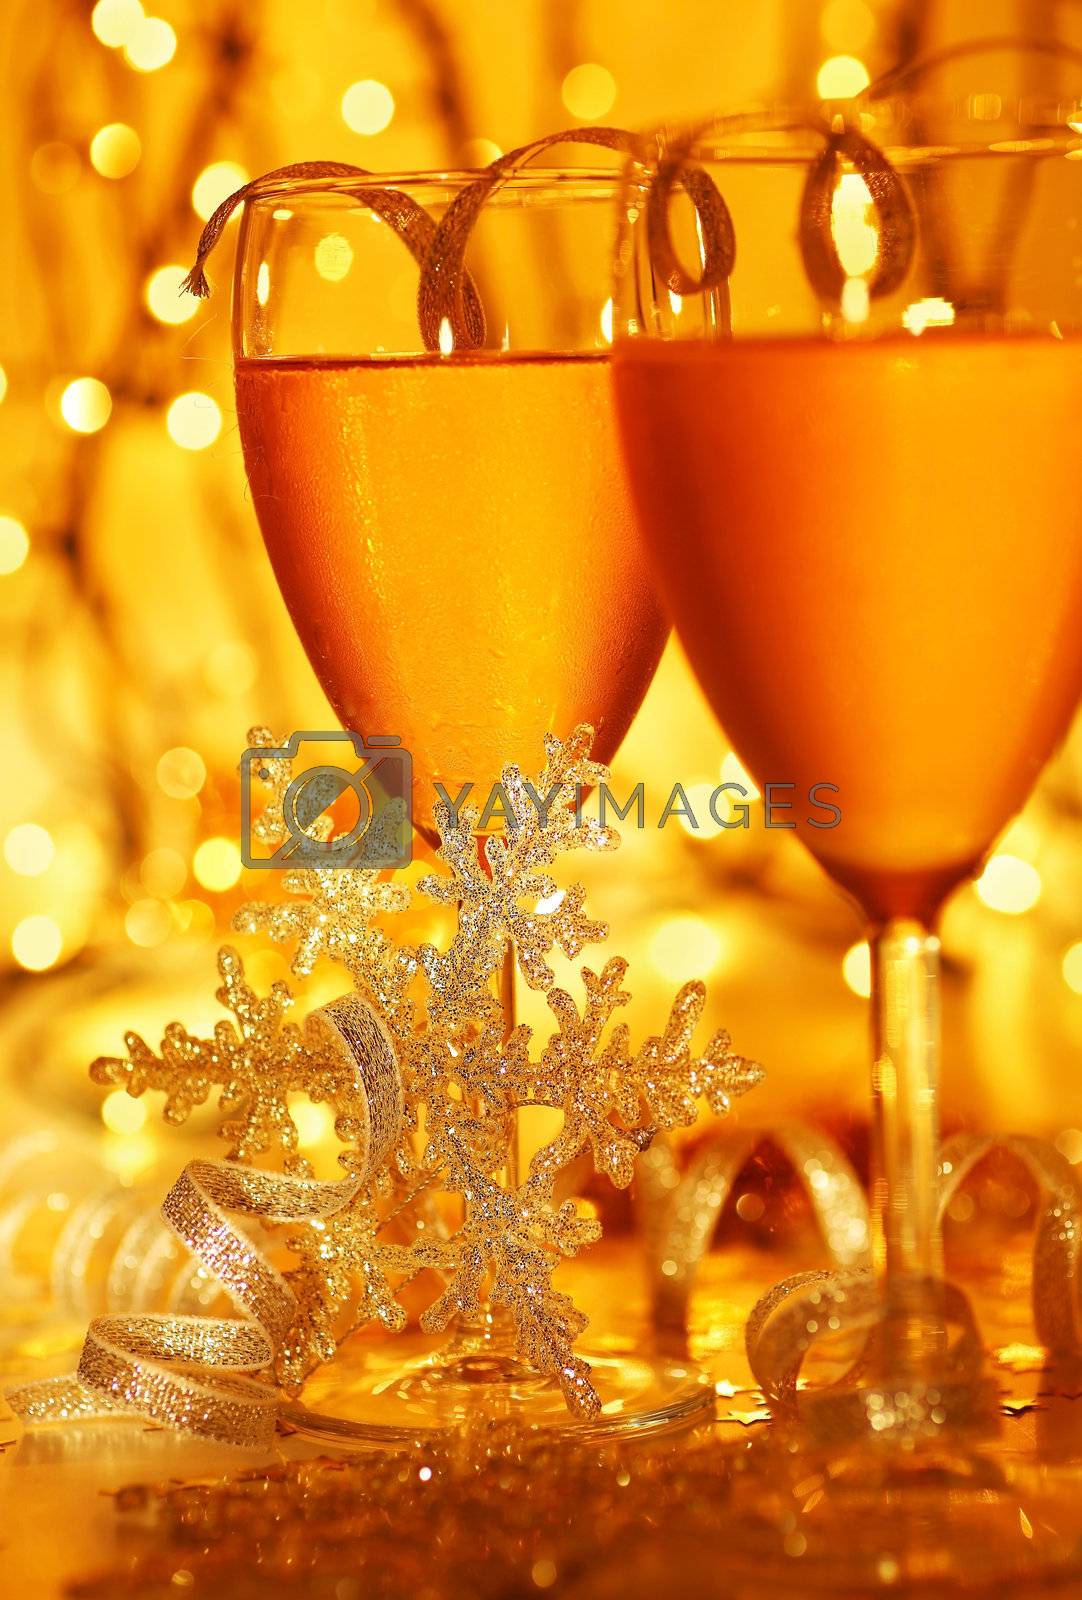 Romantic holiday drink, celebration of Christmas or new year eve, party with Champagne and festive gold ornament lights decoration